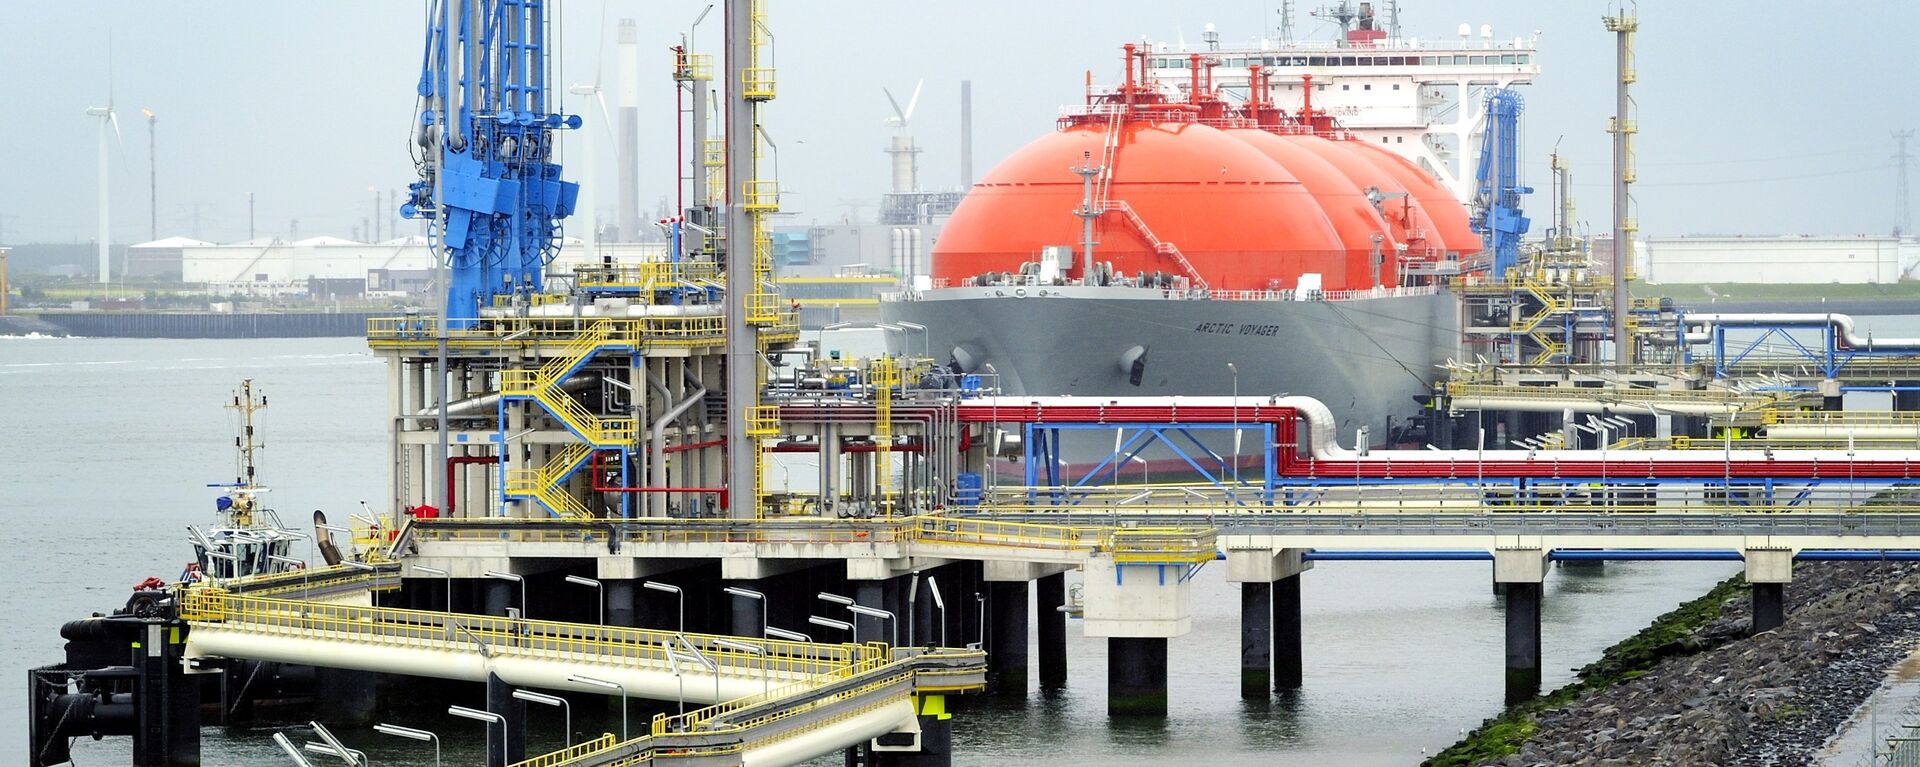 The LNG carrier, a tank ship designed for transporting liquefied natural gas, Arctic Voyager is setting for sail in the port of Rotterdam, The Netherlands on July 6, 2011 - Sputnik International, 1920, 13.07.2022